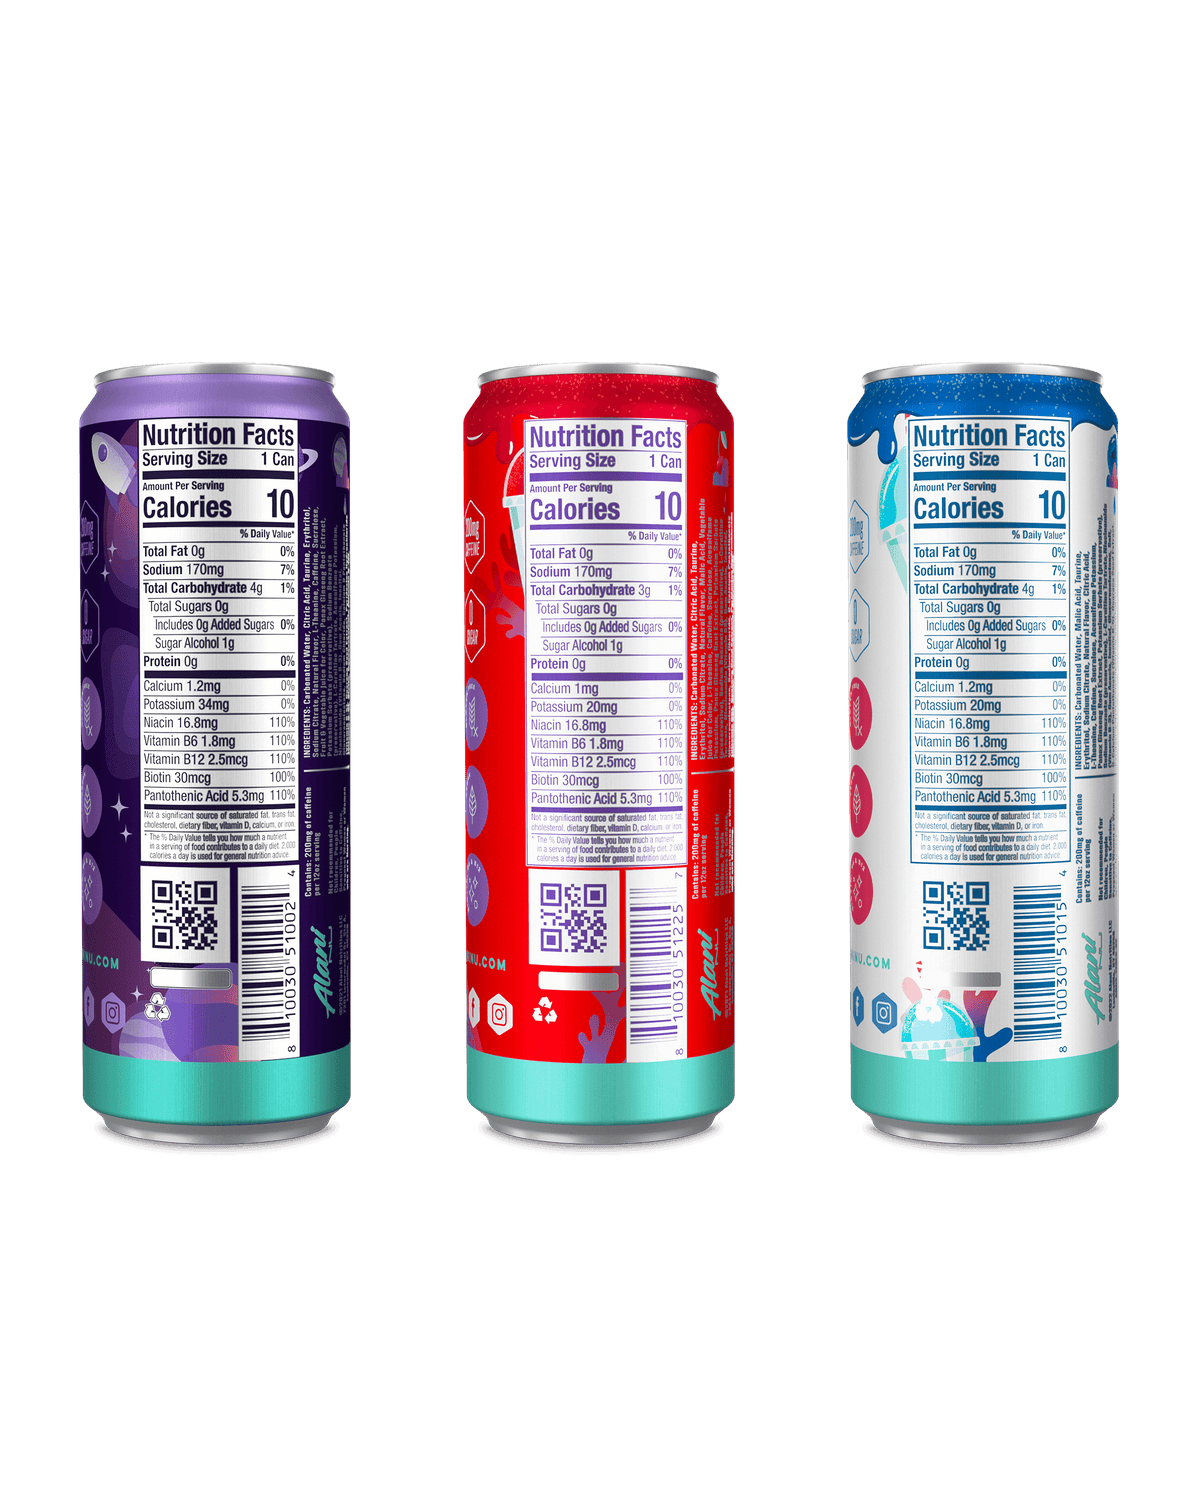 A back view of Energy drinks in Electric Energy flavor highlighting nutrition facts.